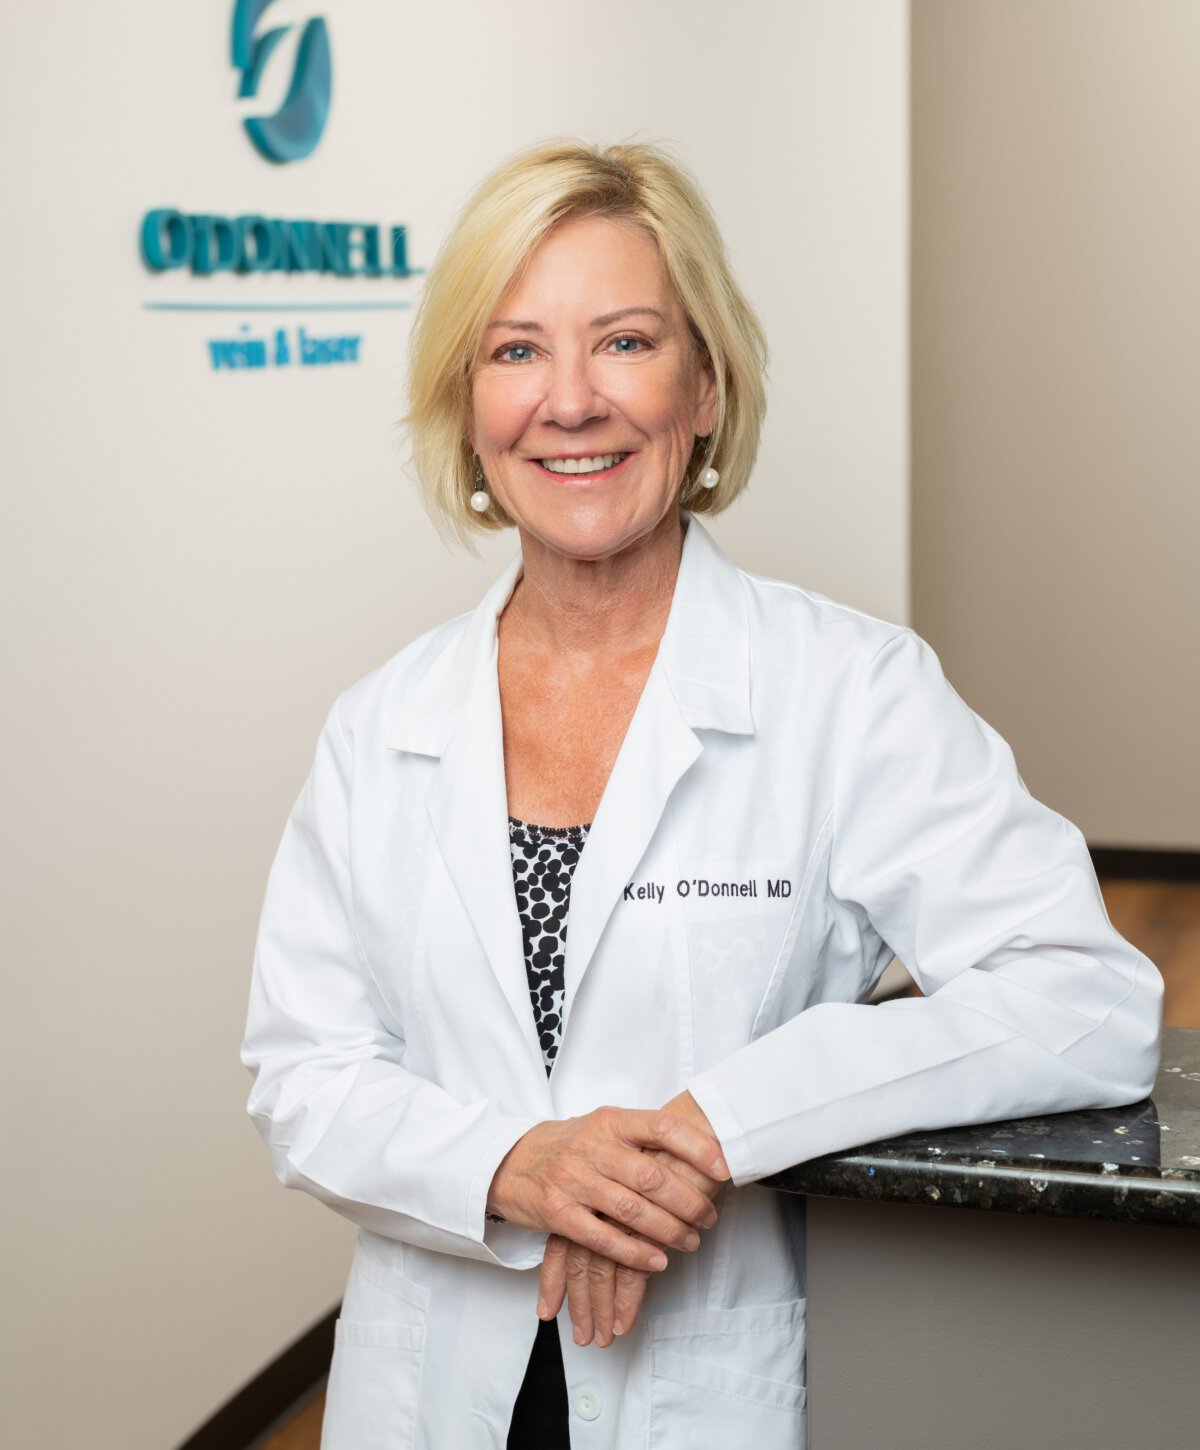 Dr. Kelly O'Donnell